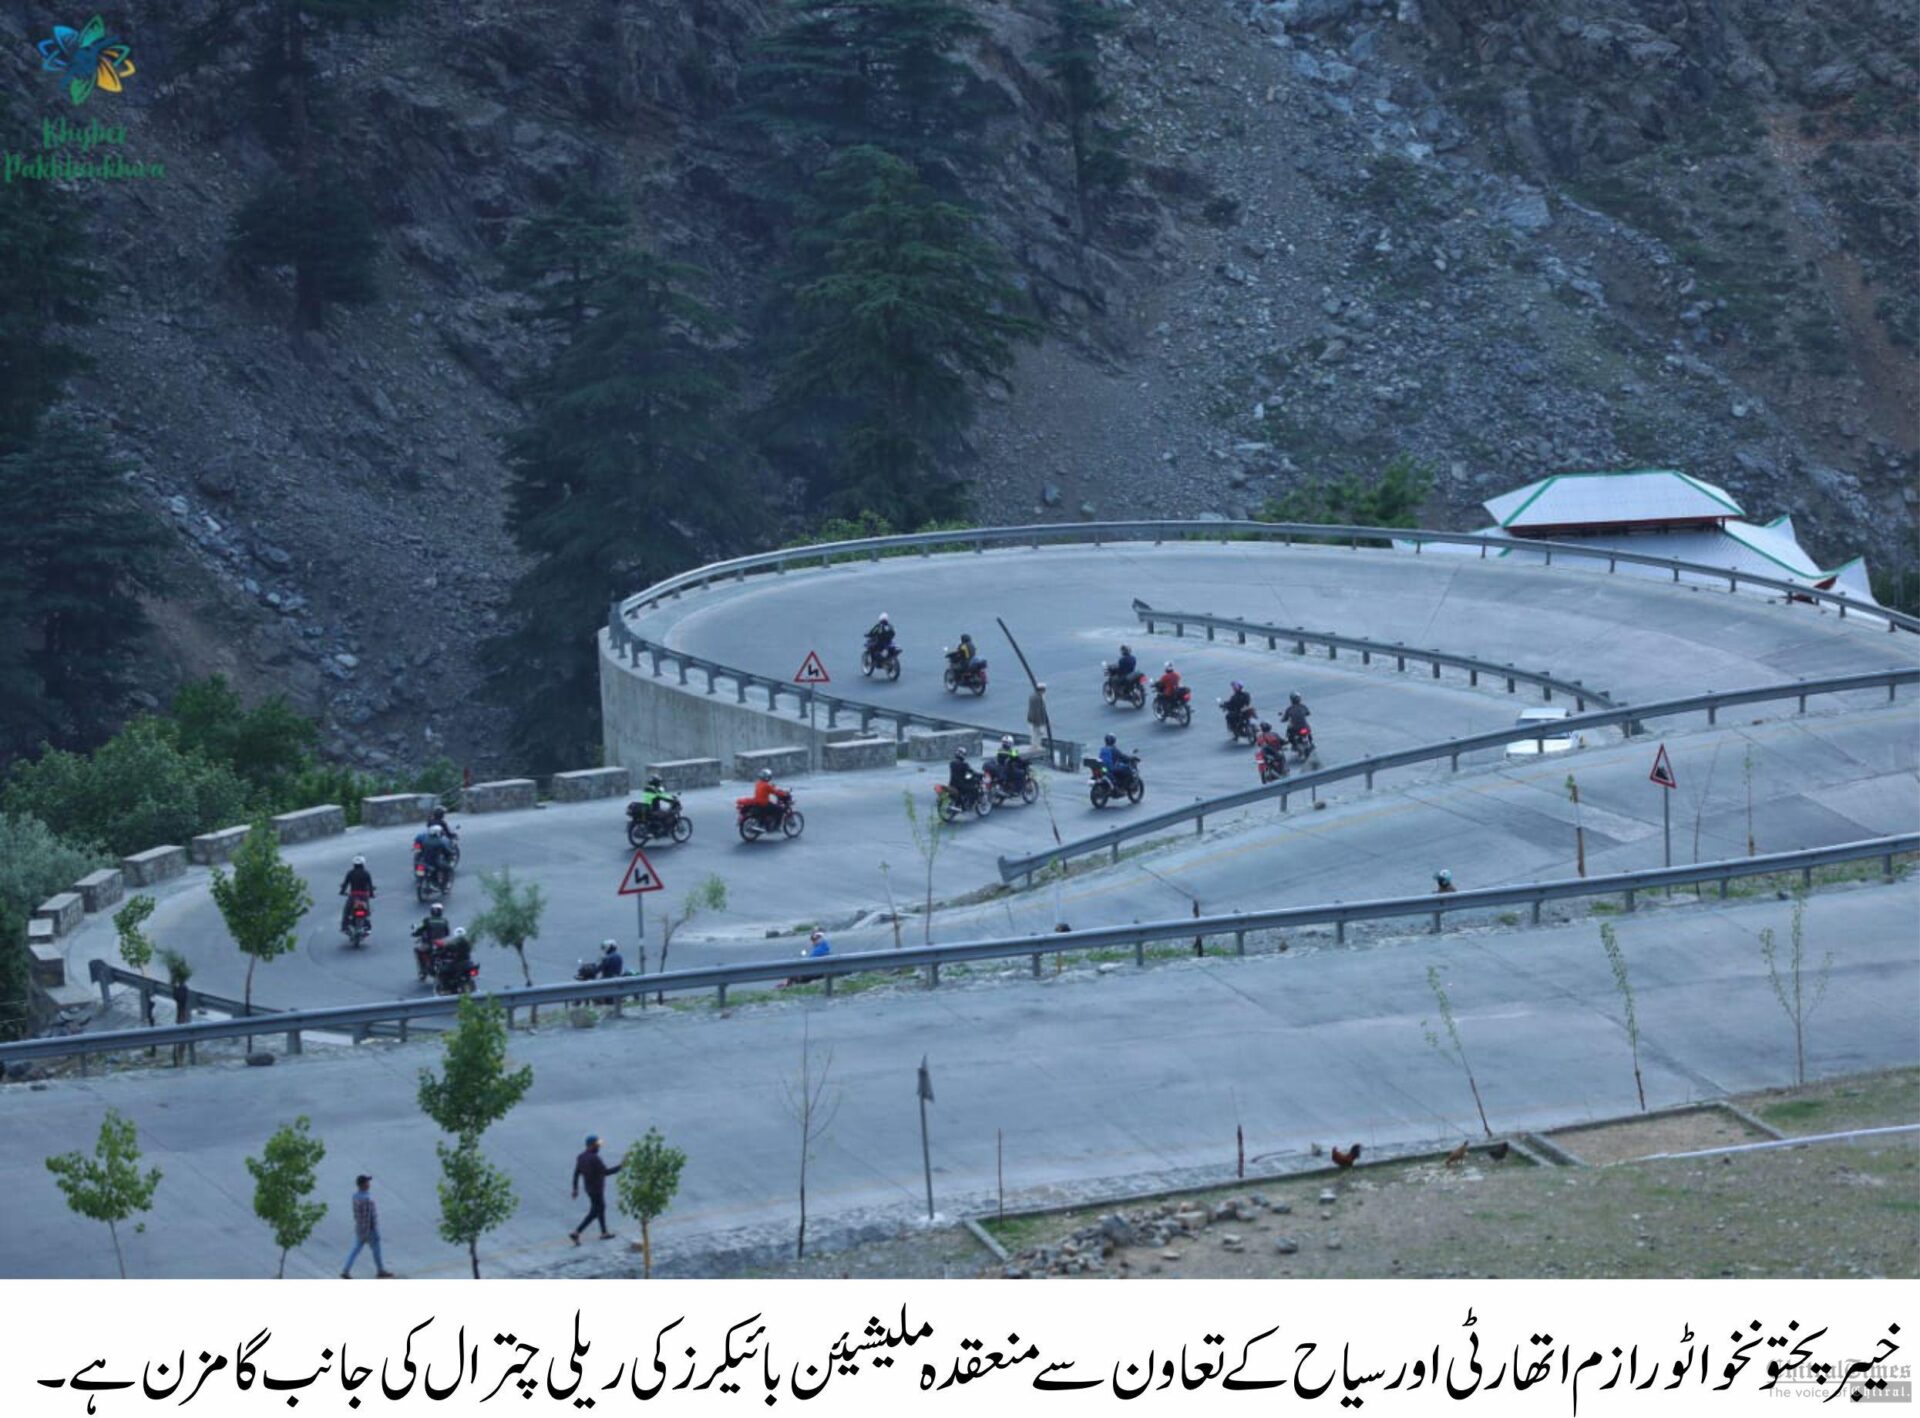 chitraltimes kalash festival chelum jusht concludes bikers attended the event chitral 7